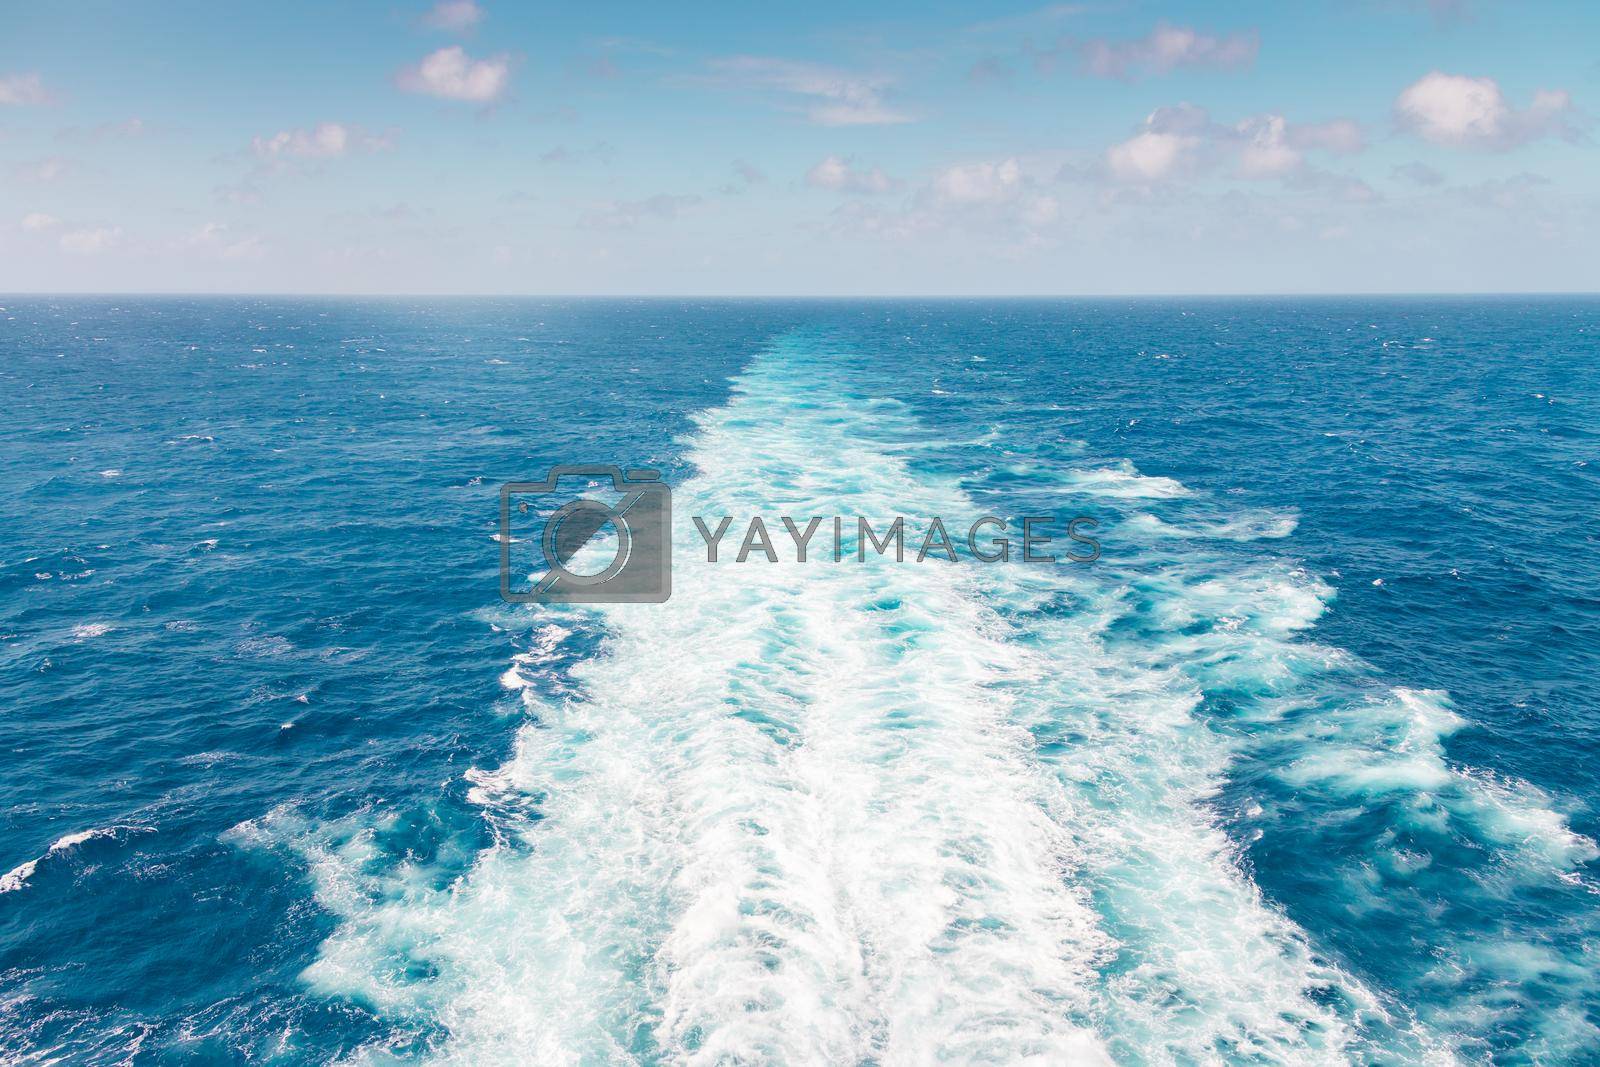 Royalty free image of Cruise ship wake or trail on ocean surface by Mariakray